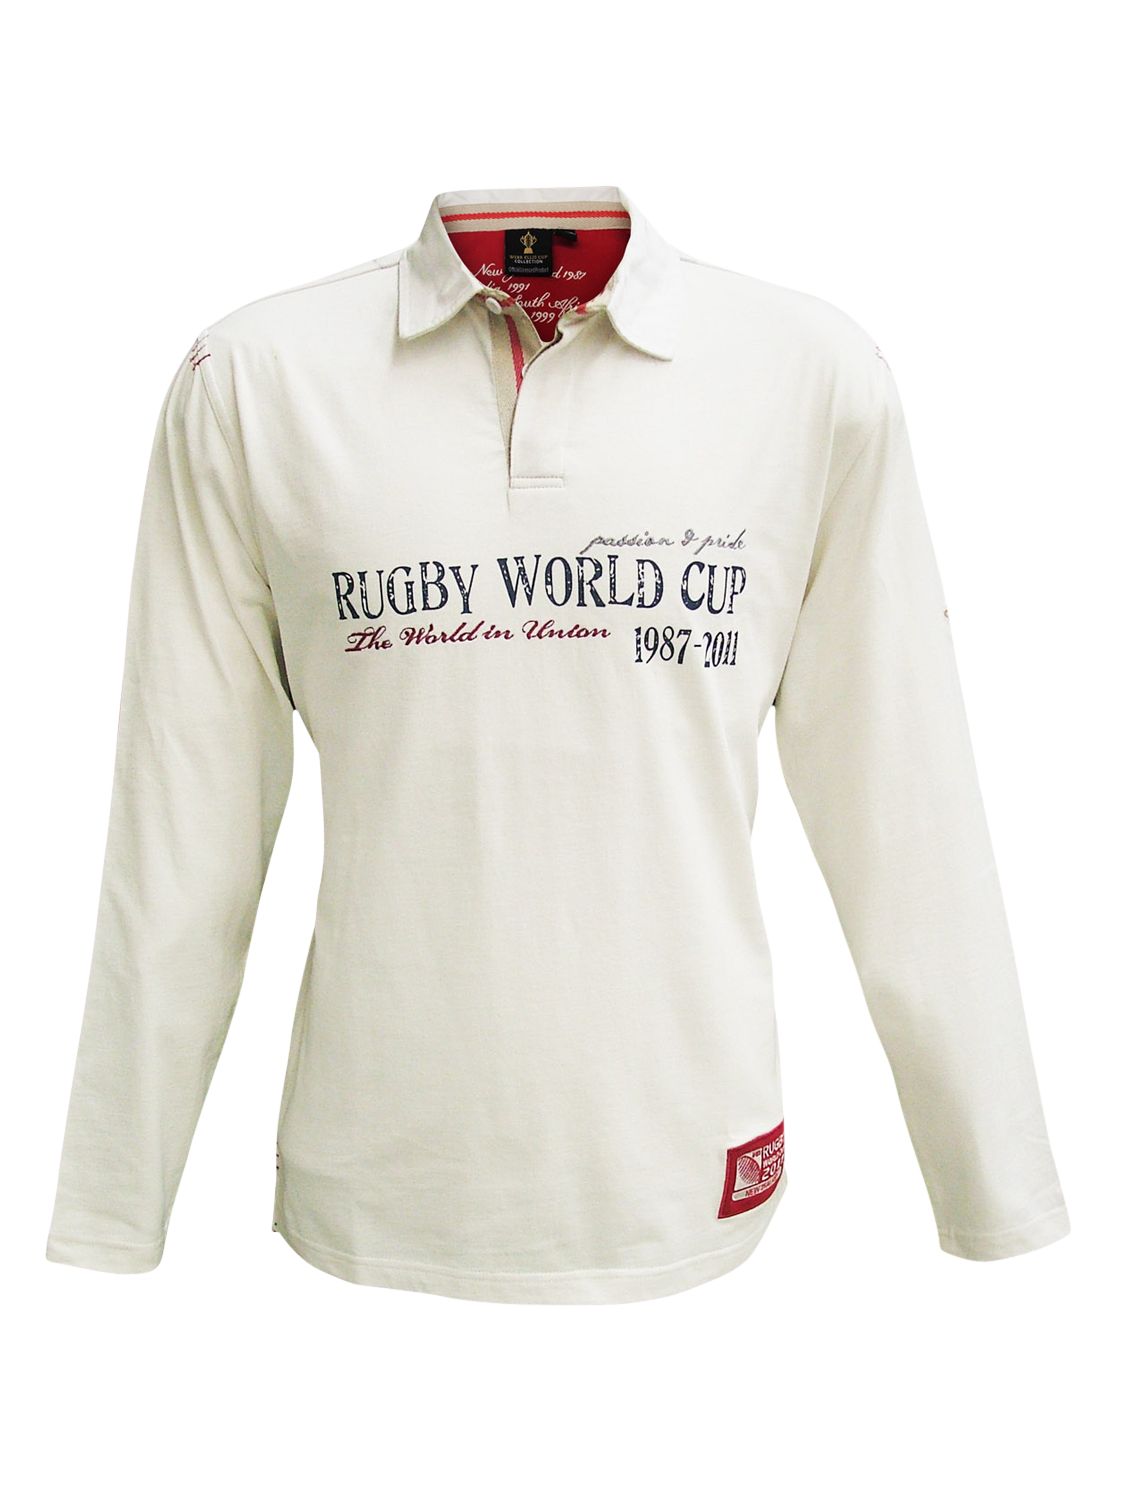 Rugby World Cup 2011 Rugby World Cup Webb Ellis Heritage Rugby Shirt,